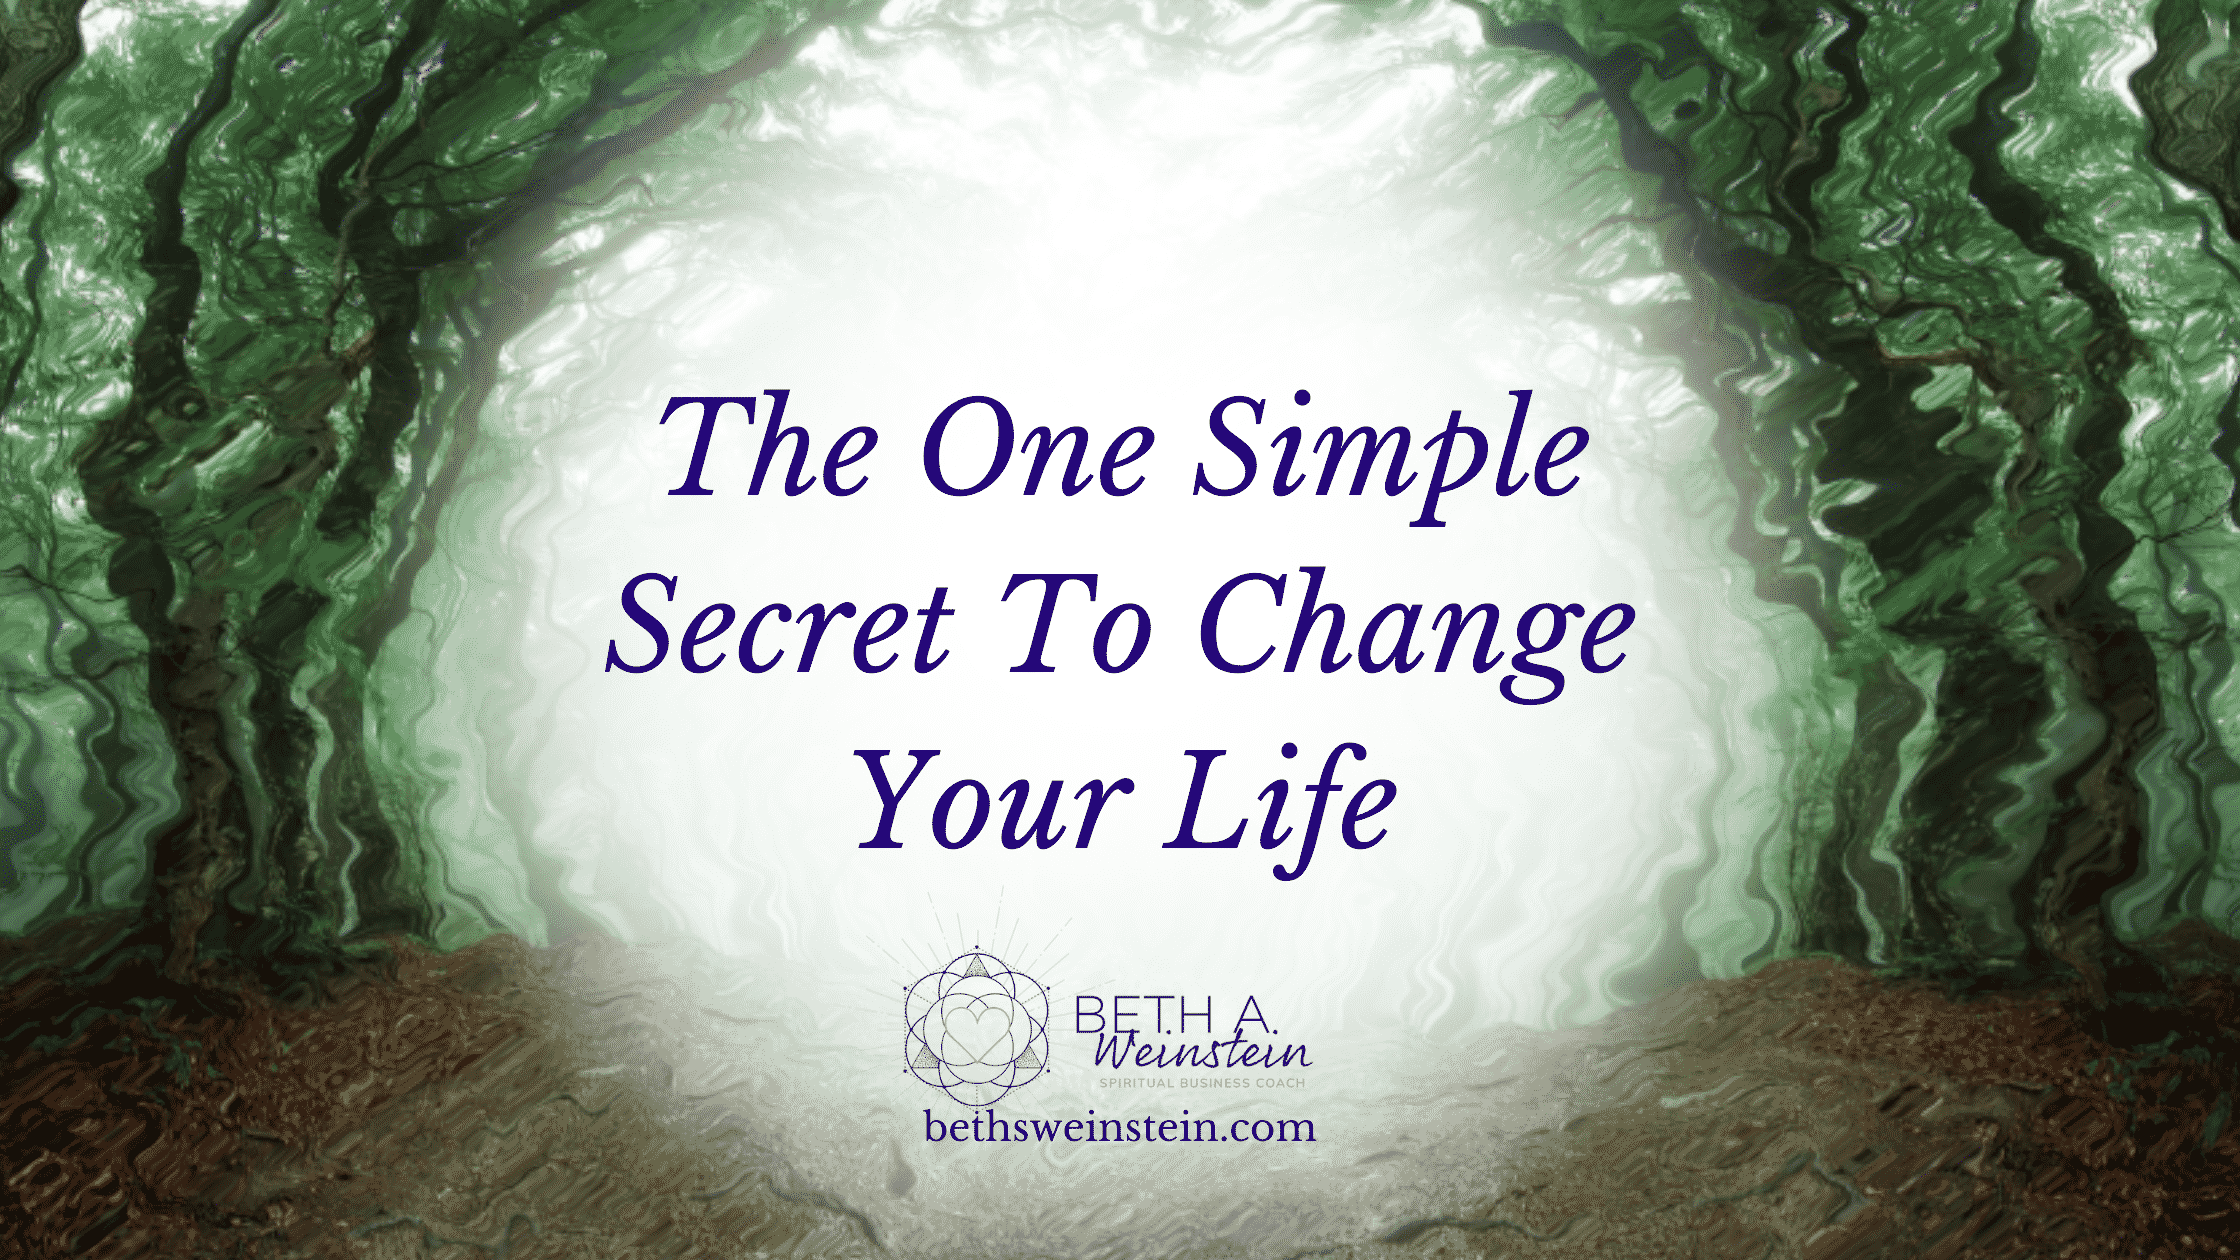 The One Simple Secret to Change Your Life